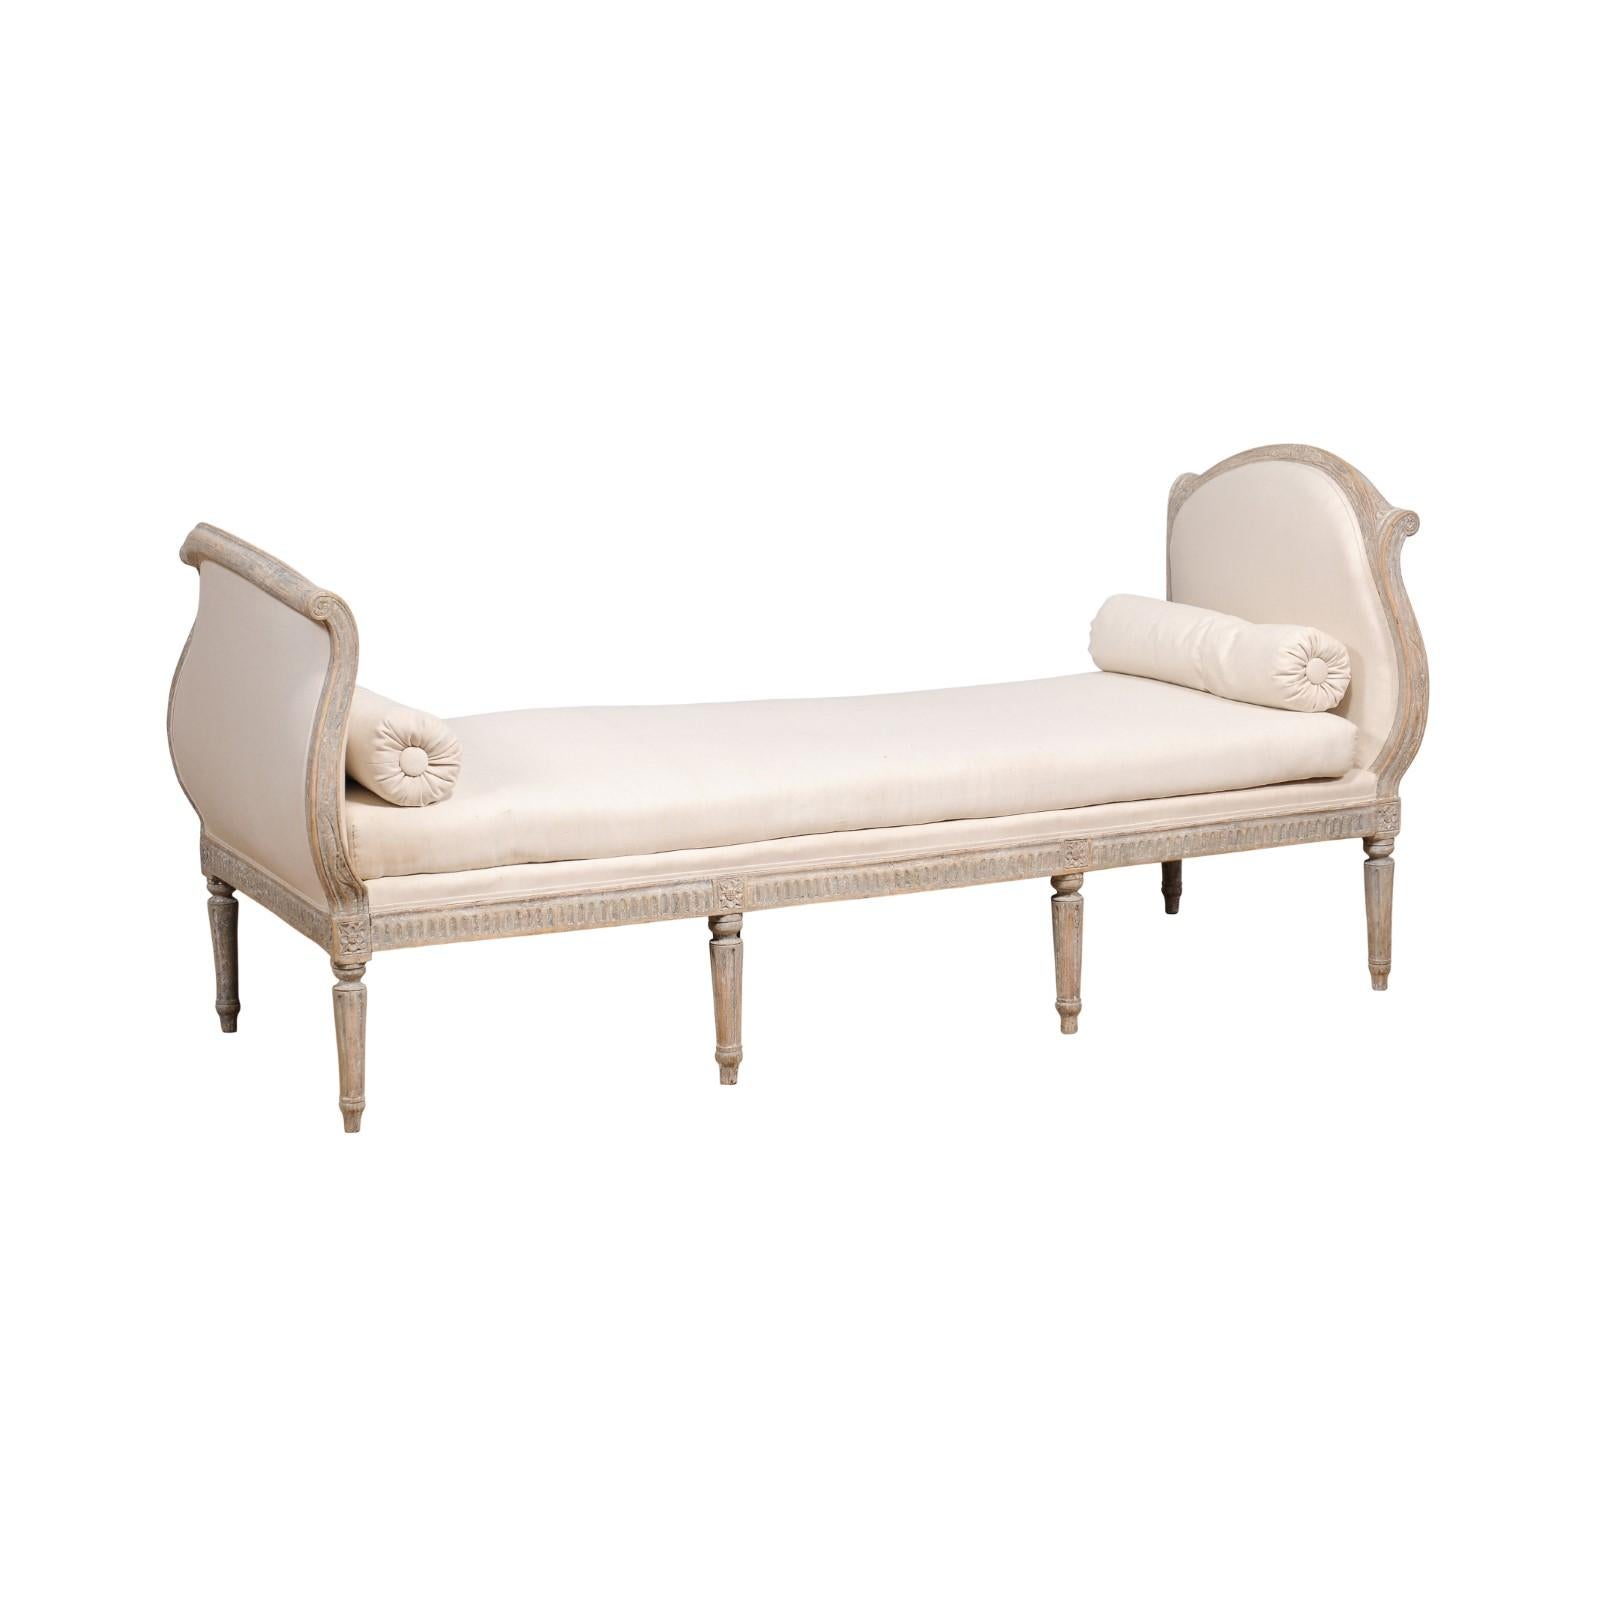 A Swedish Gustavian period grey painted daybed from the 18th century with out-scrolling sides, fluted apron and legs and carved rosettes. Step into an ambiance of timeless elegance with this 18th-century Swedish Gustavian daybed. Painted in a